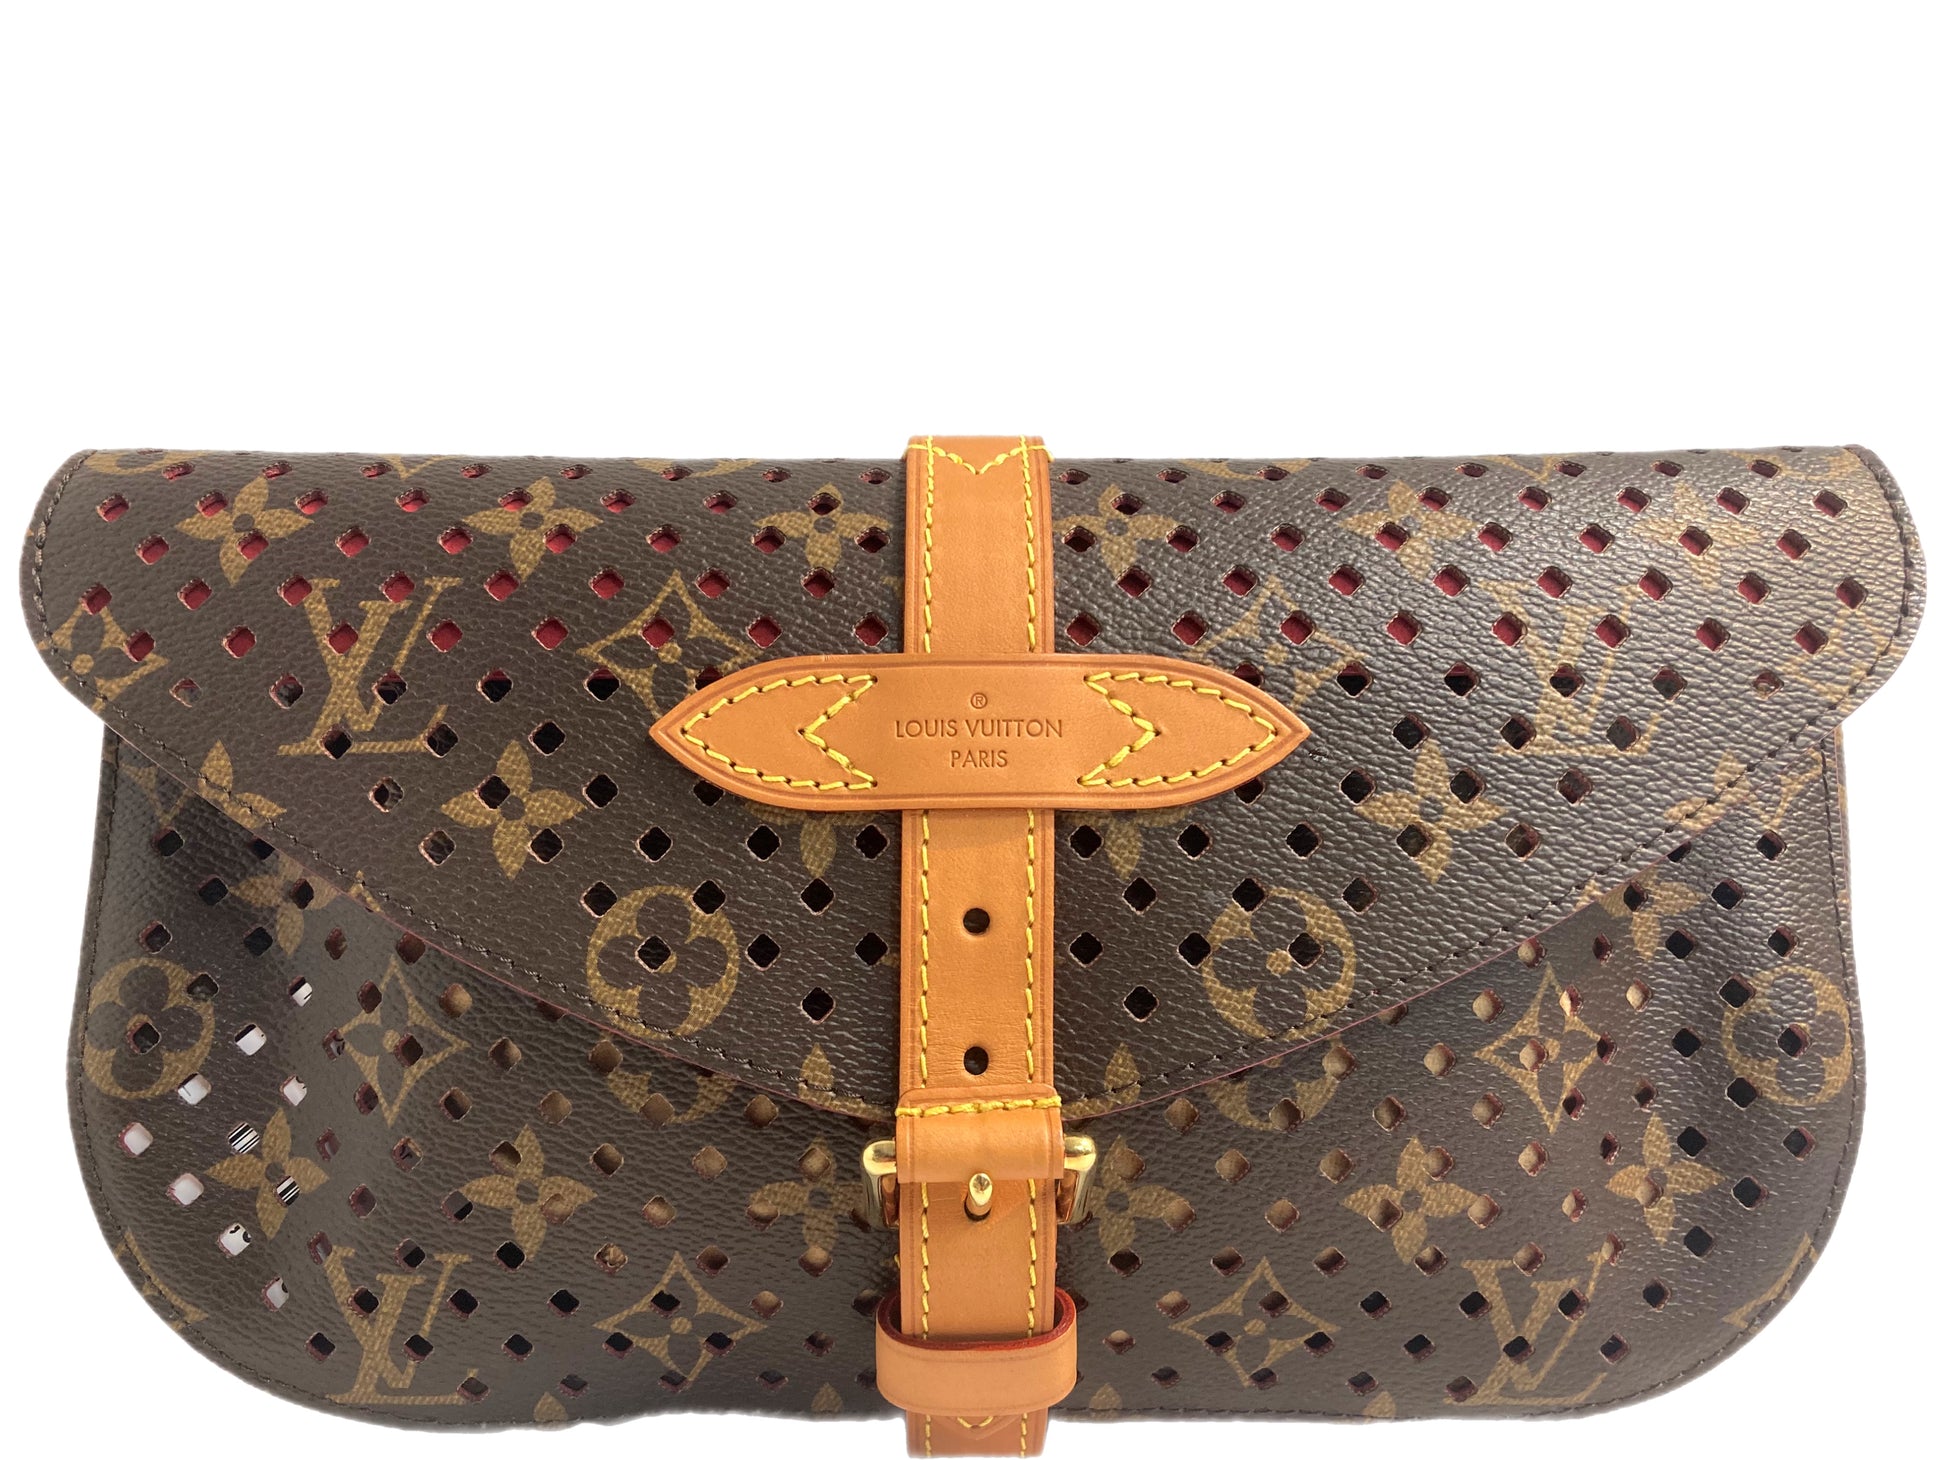 Louis Vuitton Monogram Perforated Leather Belt Black Pony-style